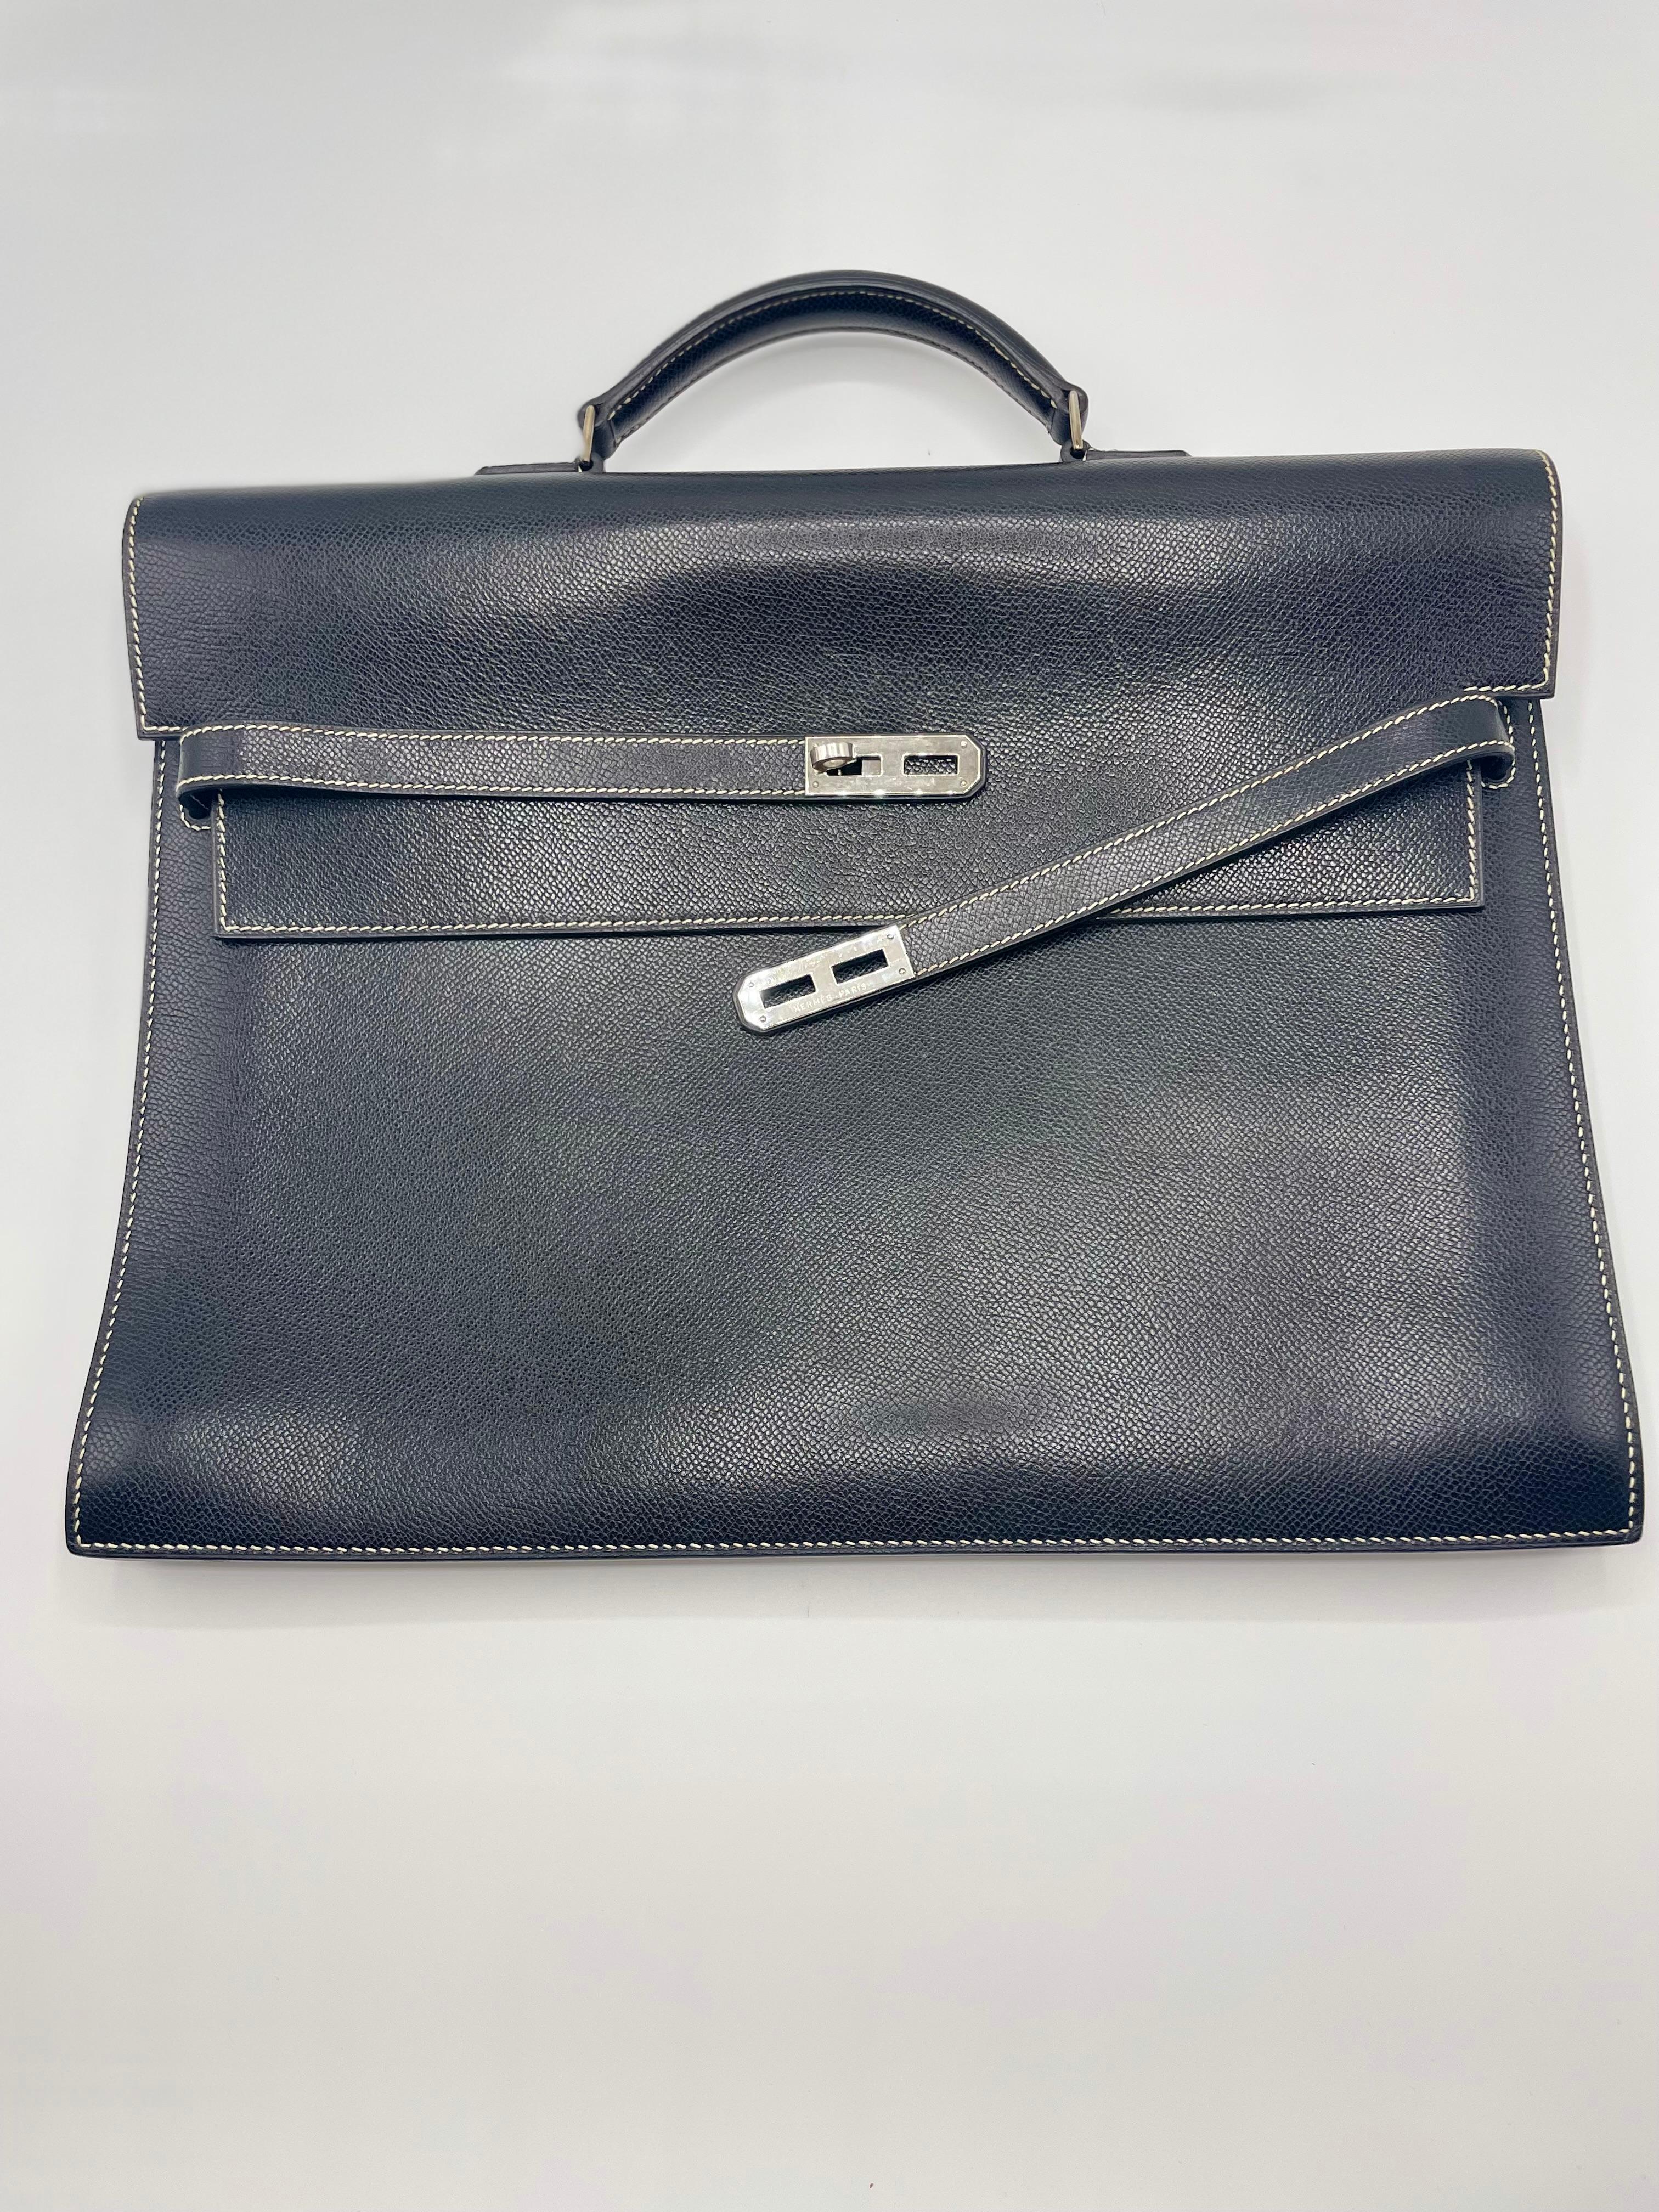 HERMES HERMES Kelly Depeche 36 business bag Y briefcase Togo leather Black  GHW Used ｜Product Code：2101216921511｜BRAND OFF Online Store